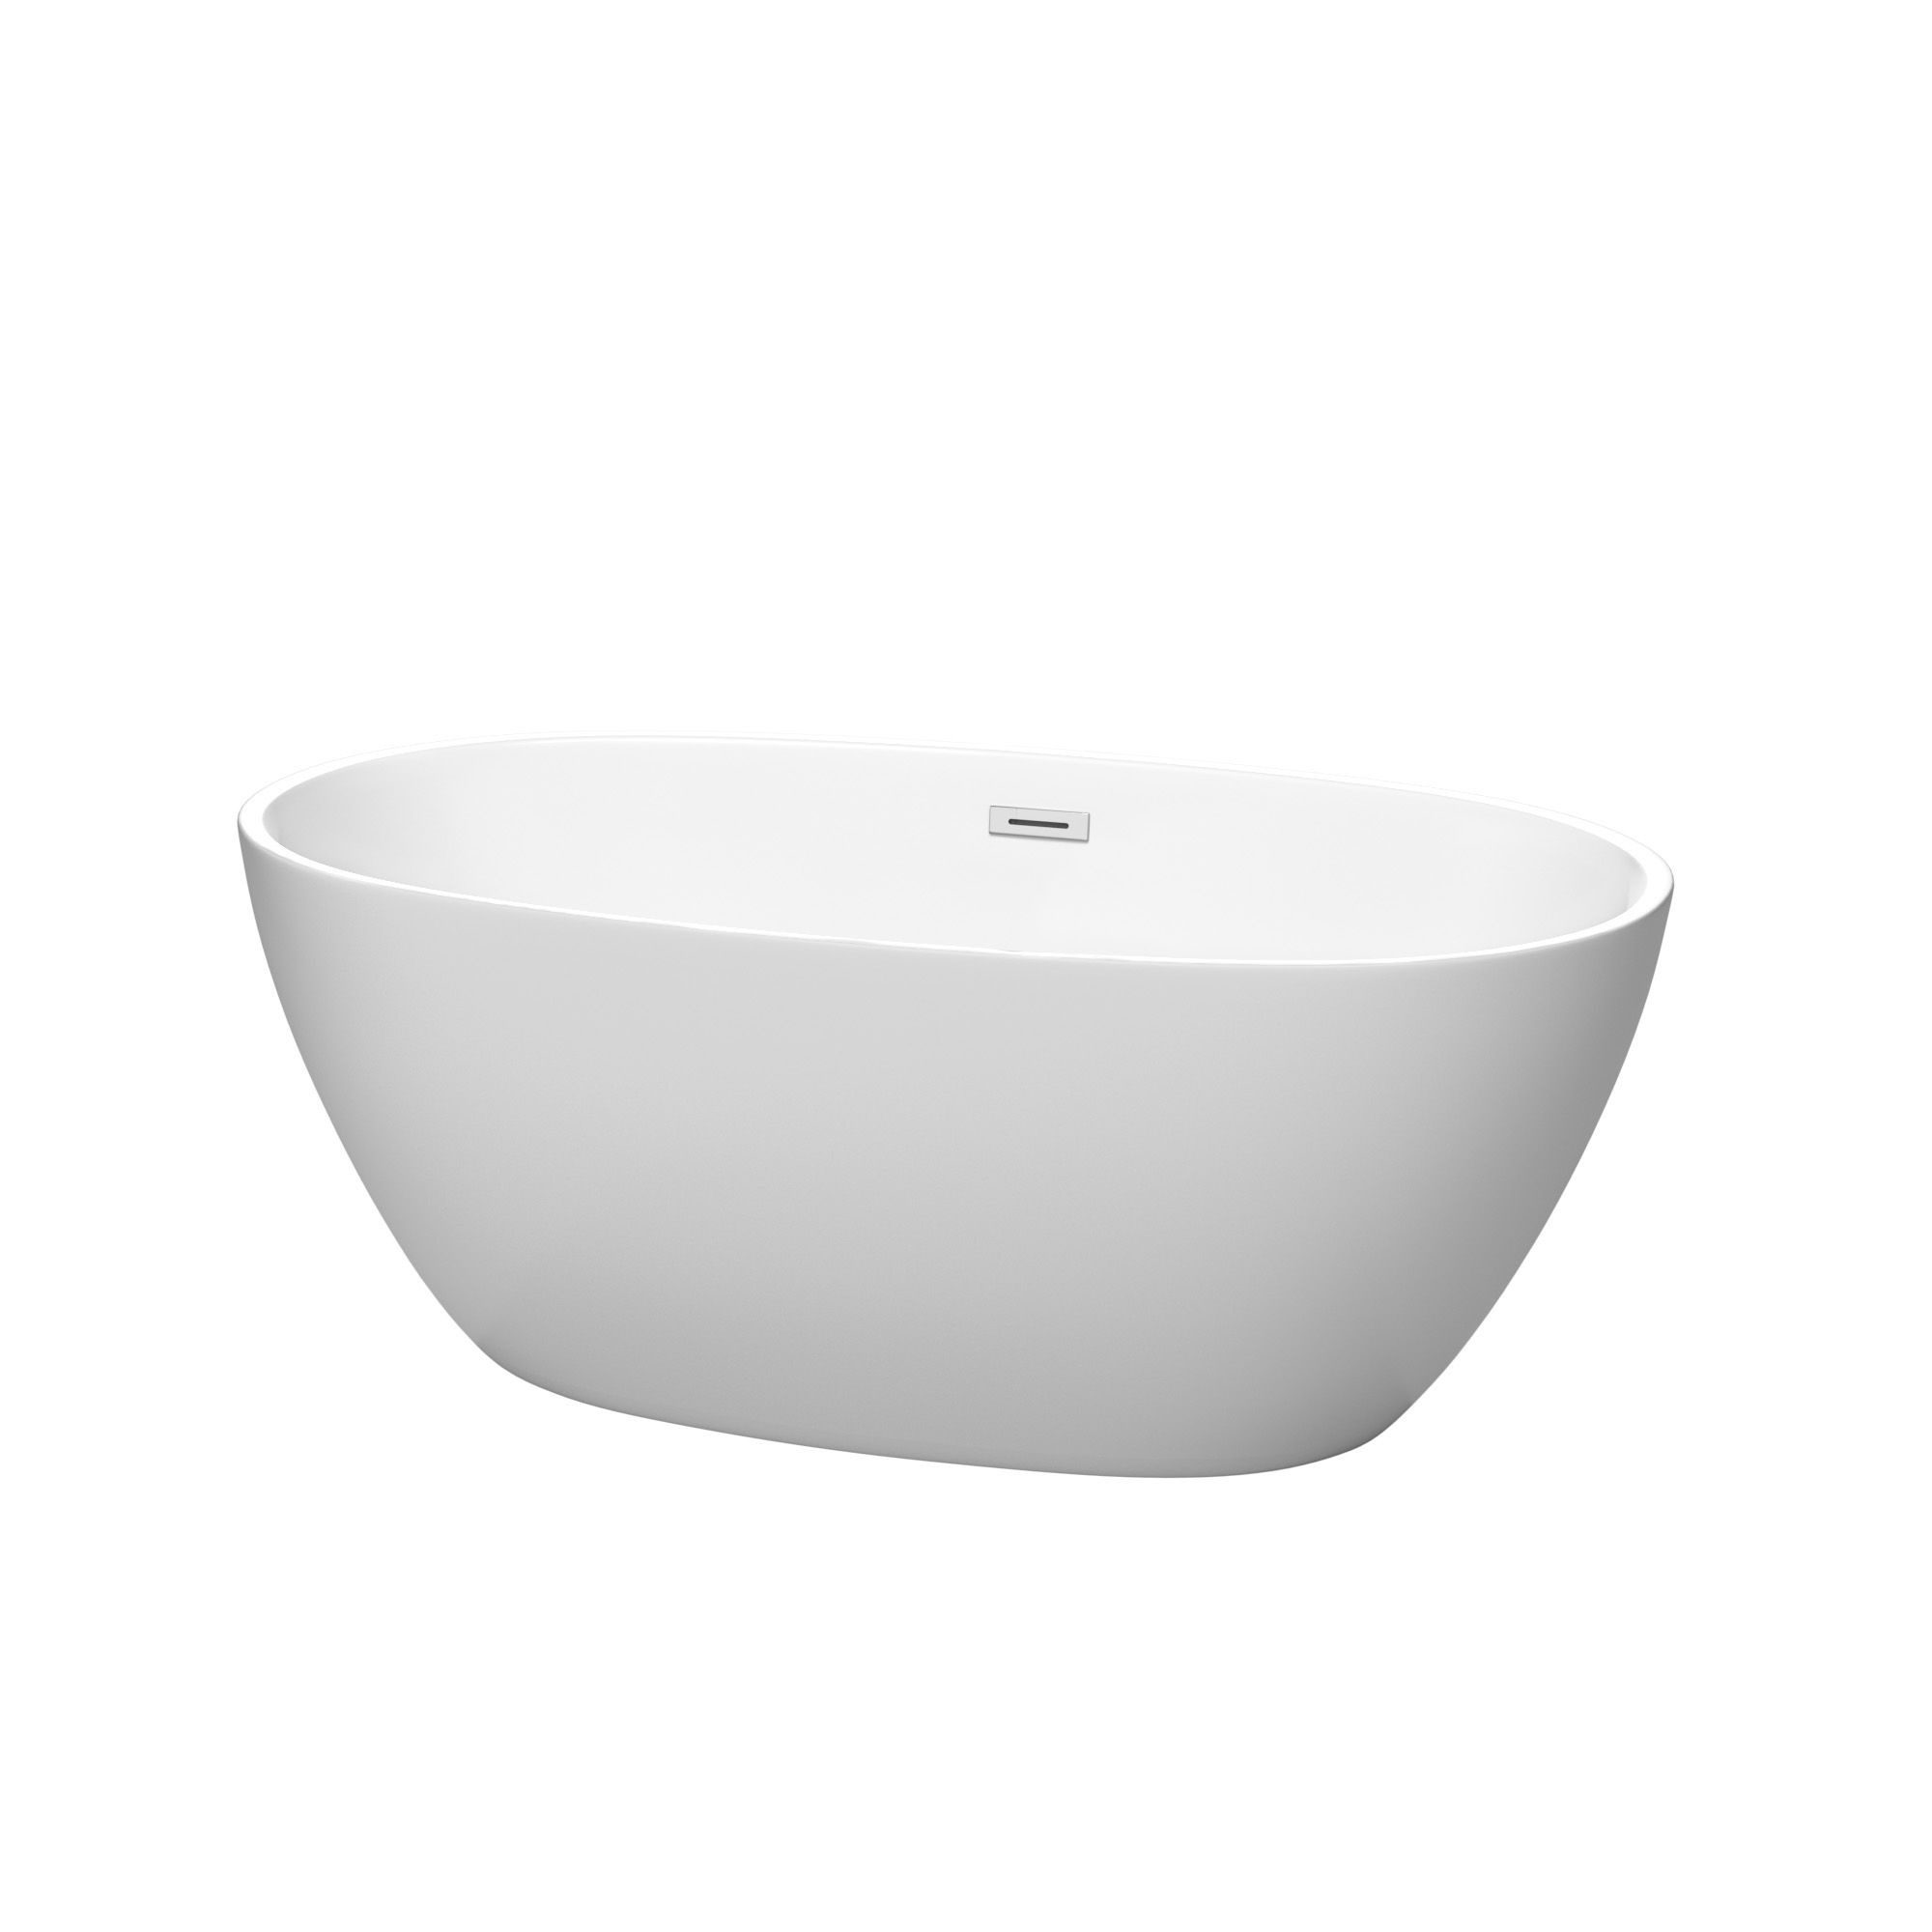 59" Freestanding Bathtub in Matte White with Polished Chrome Drain and Overflow Trim Finish